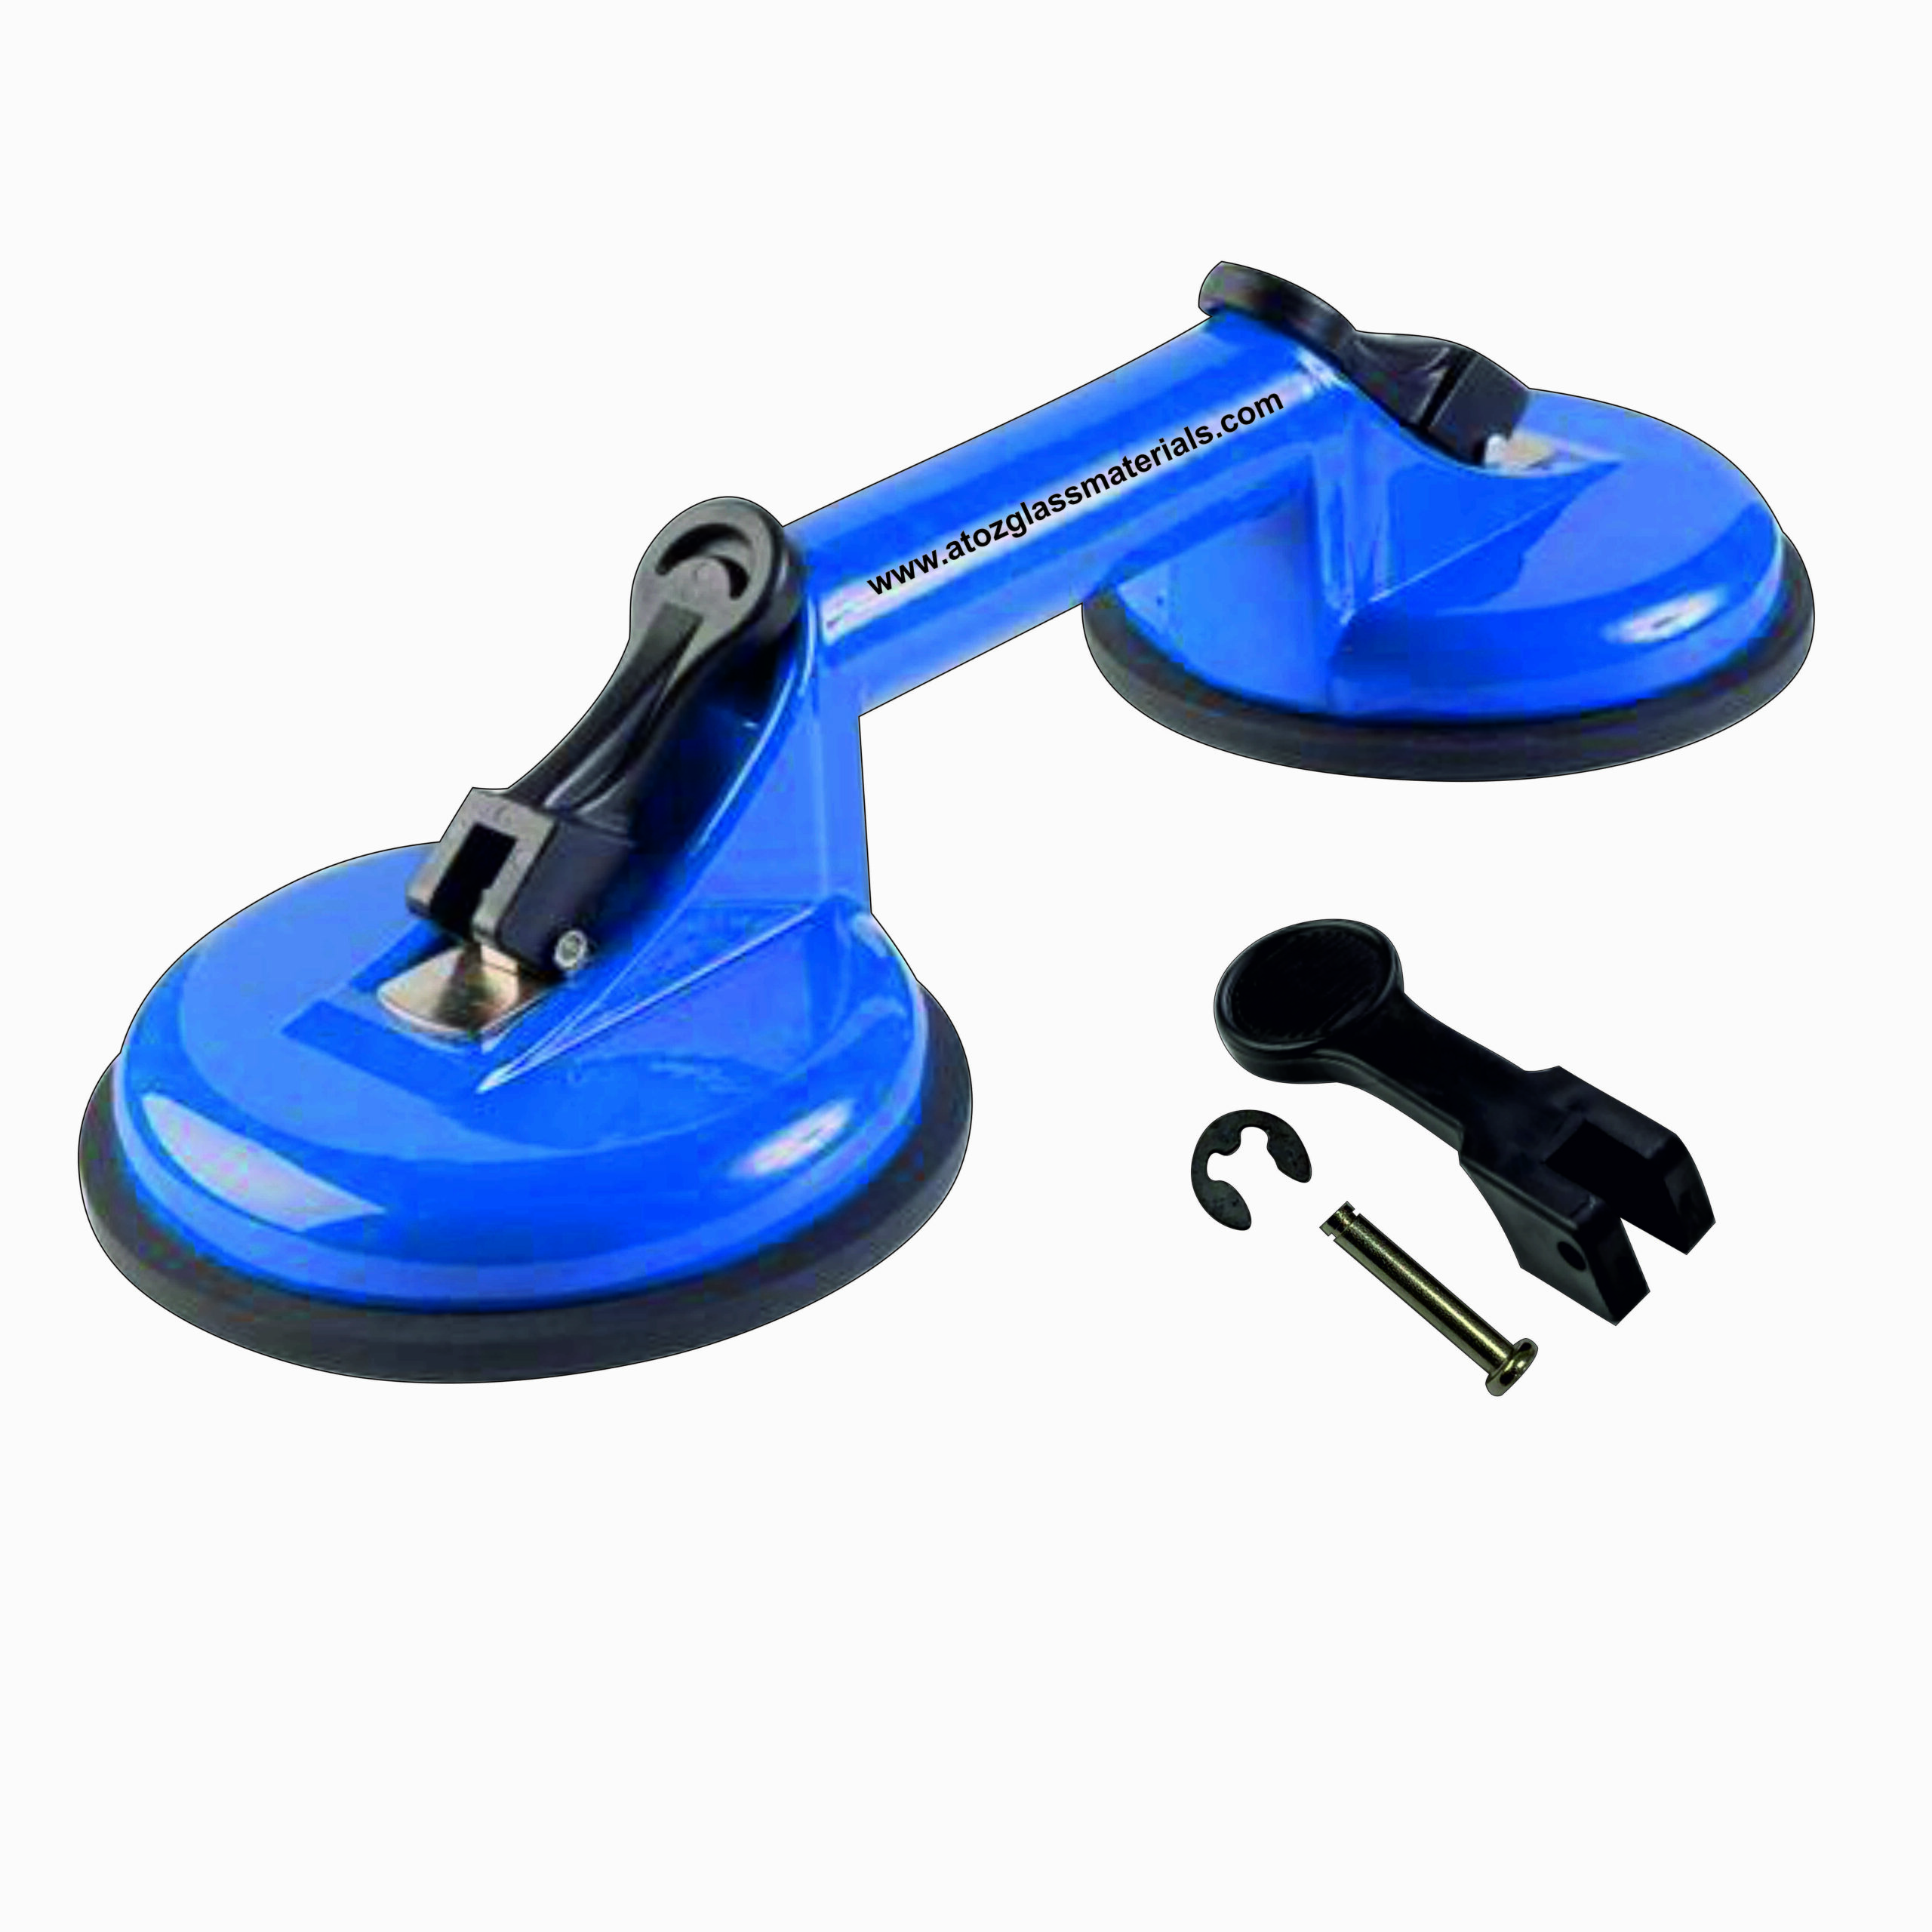 GLASS SUCTION LIFTER CUP a